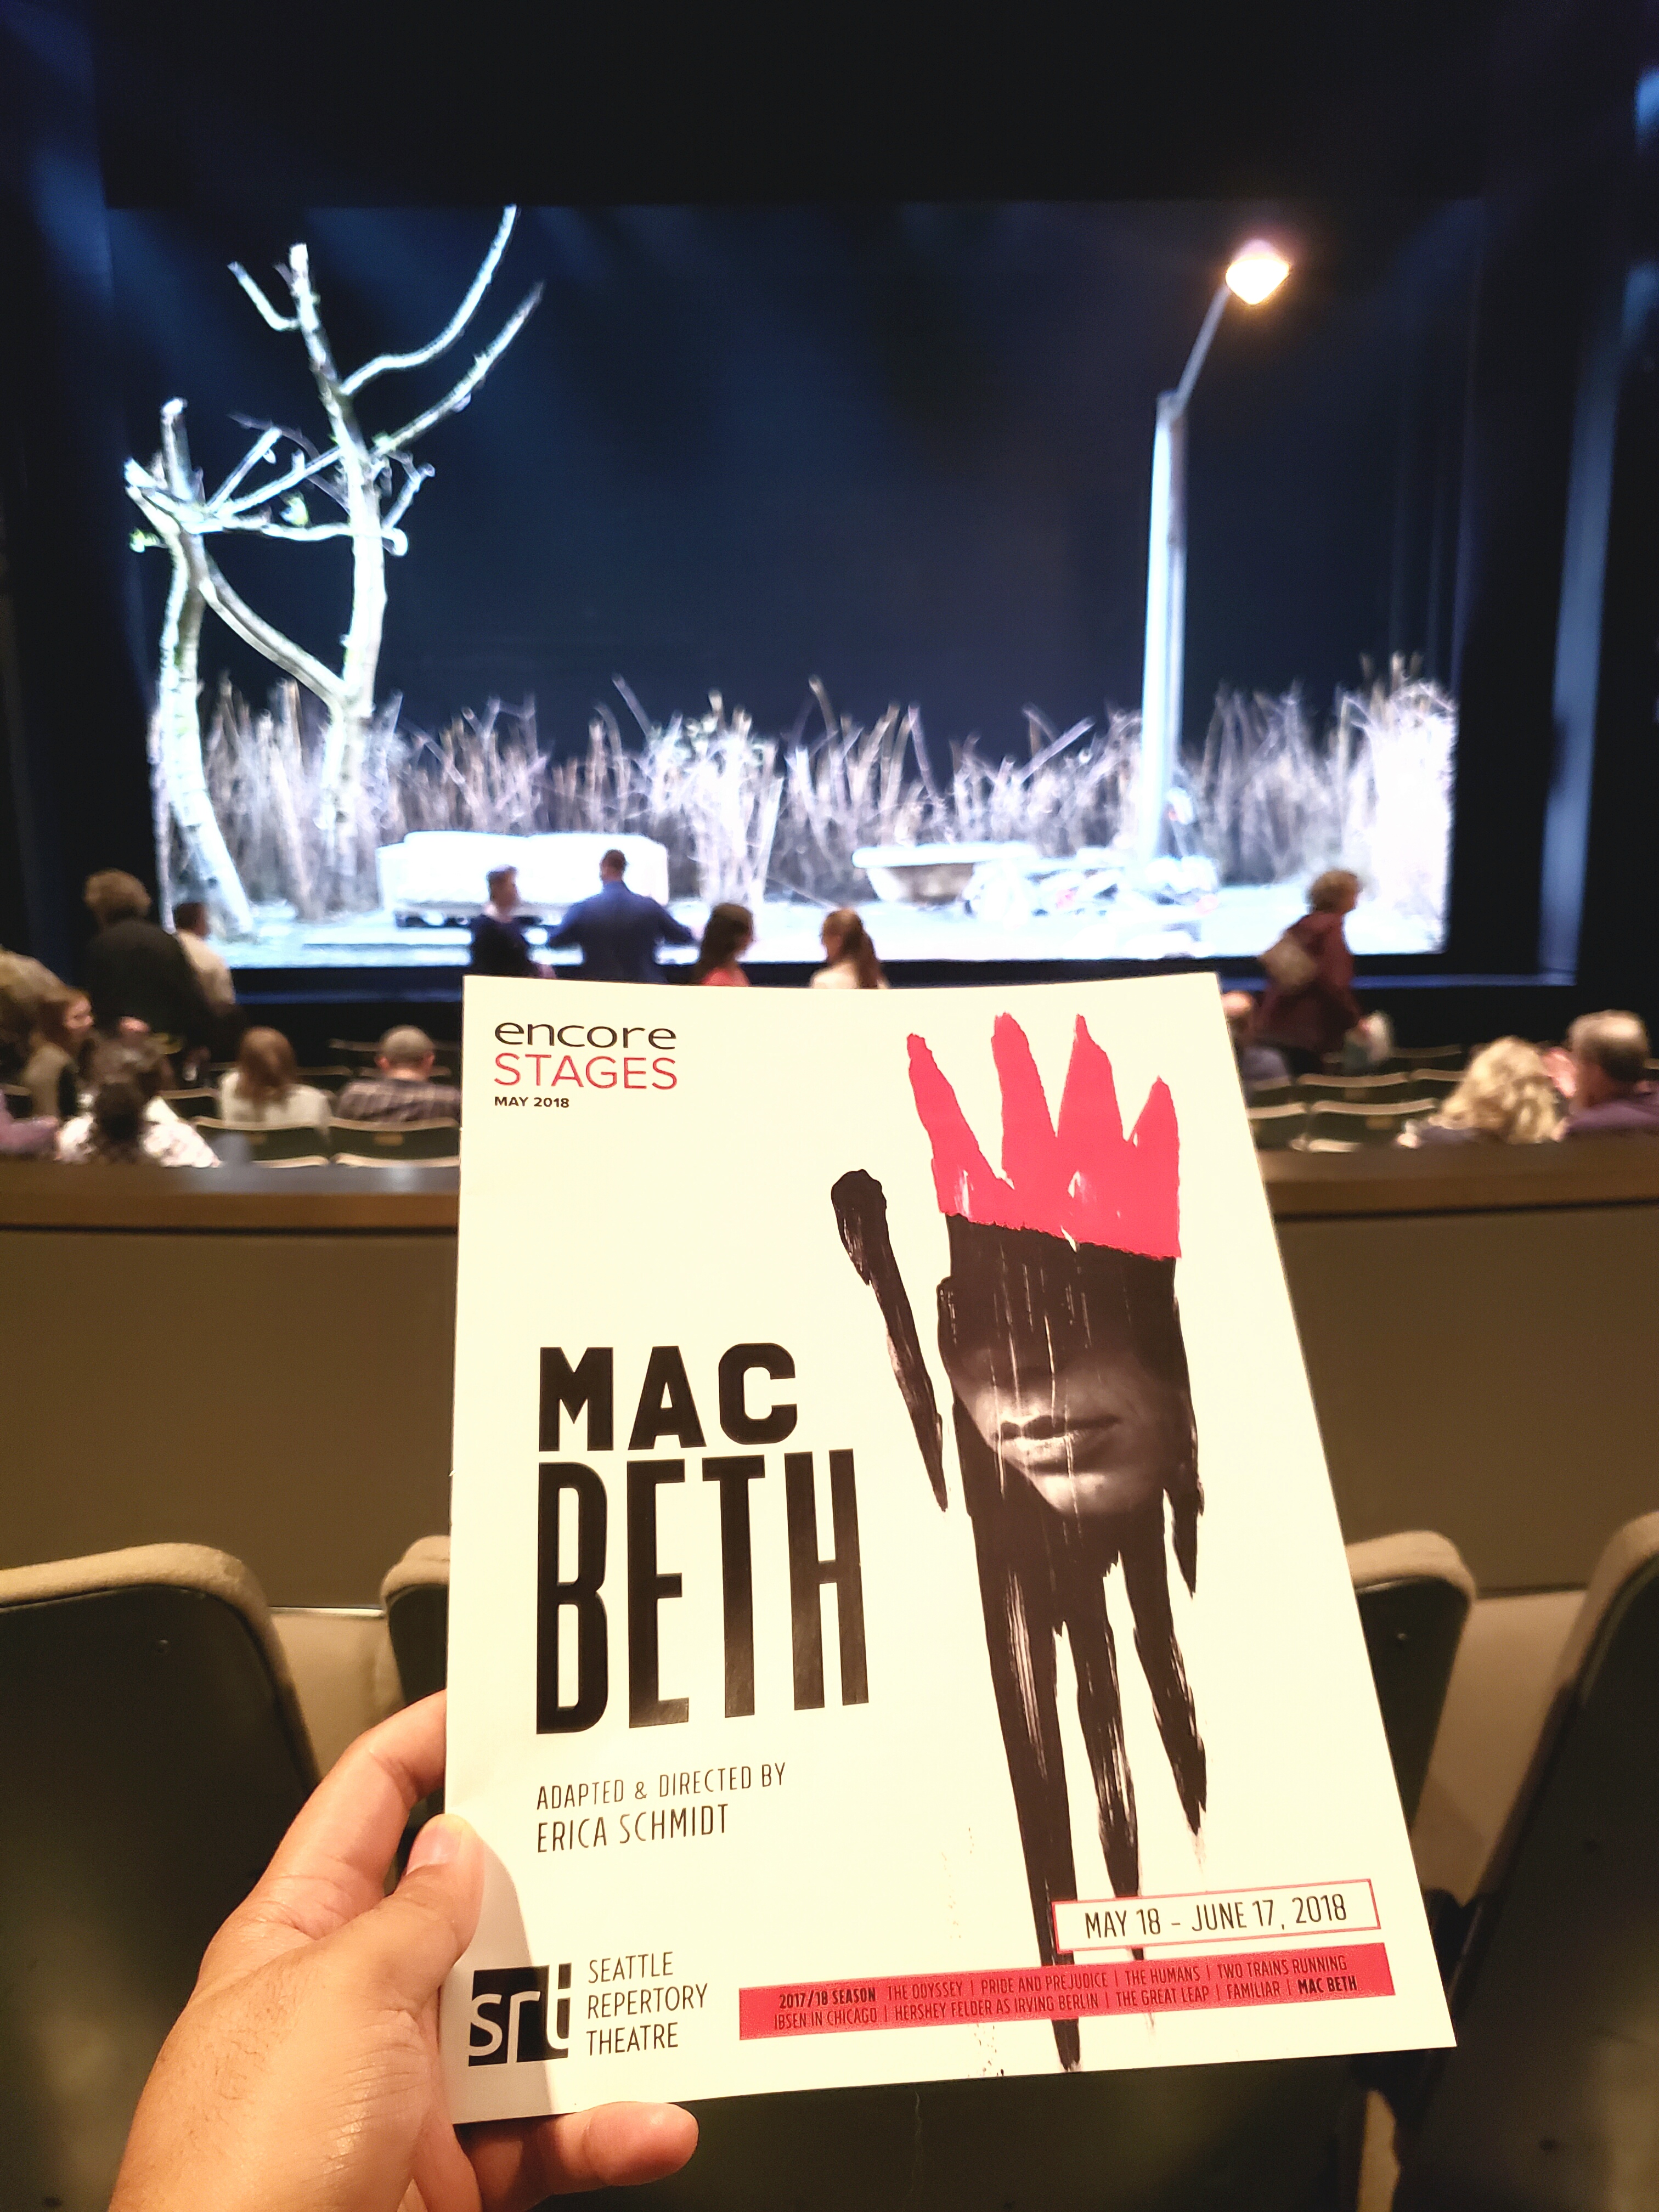 Watched William Shakespeare's tragic play Macbeth. Old english made it difficult to follow especially with no set changes between scenes and double/tripple/quadruple role casting. Nice blood effects and beheading though.